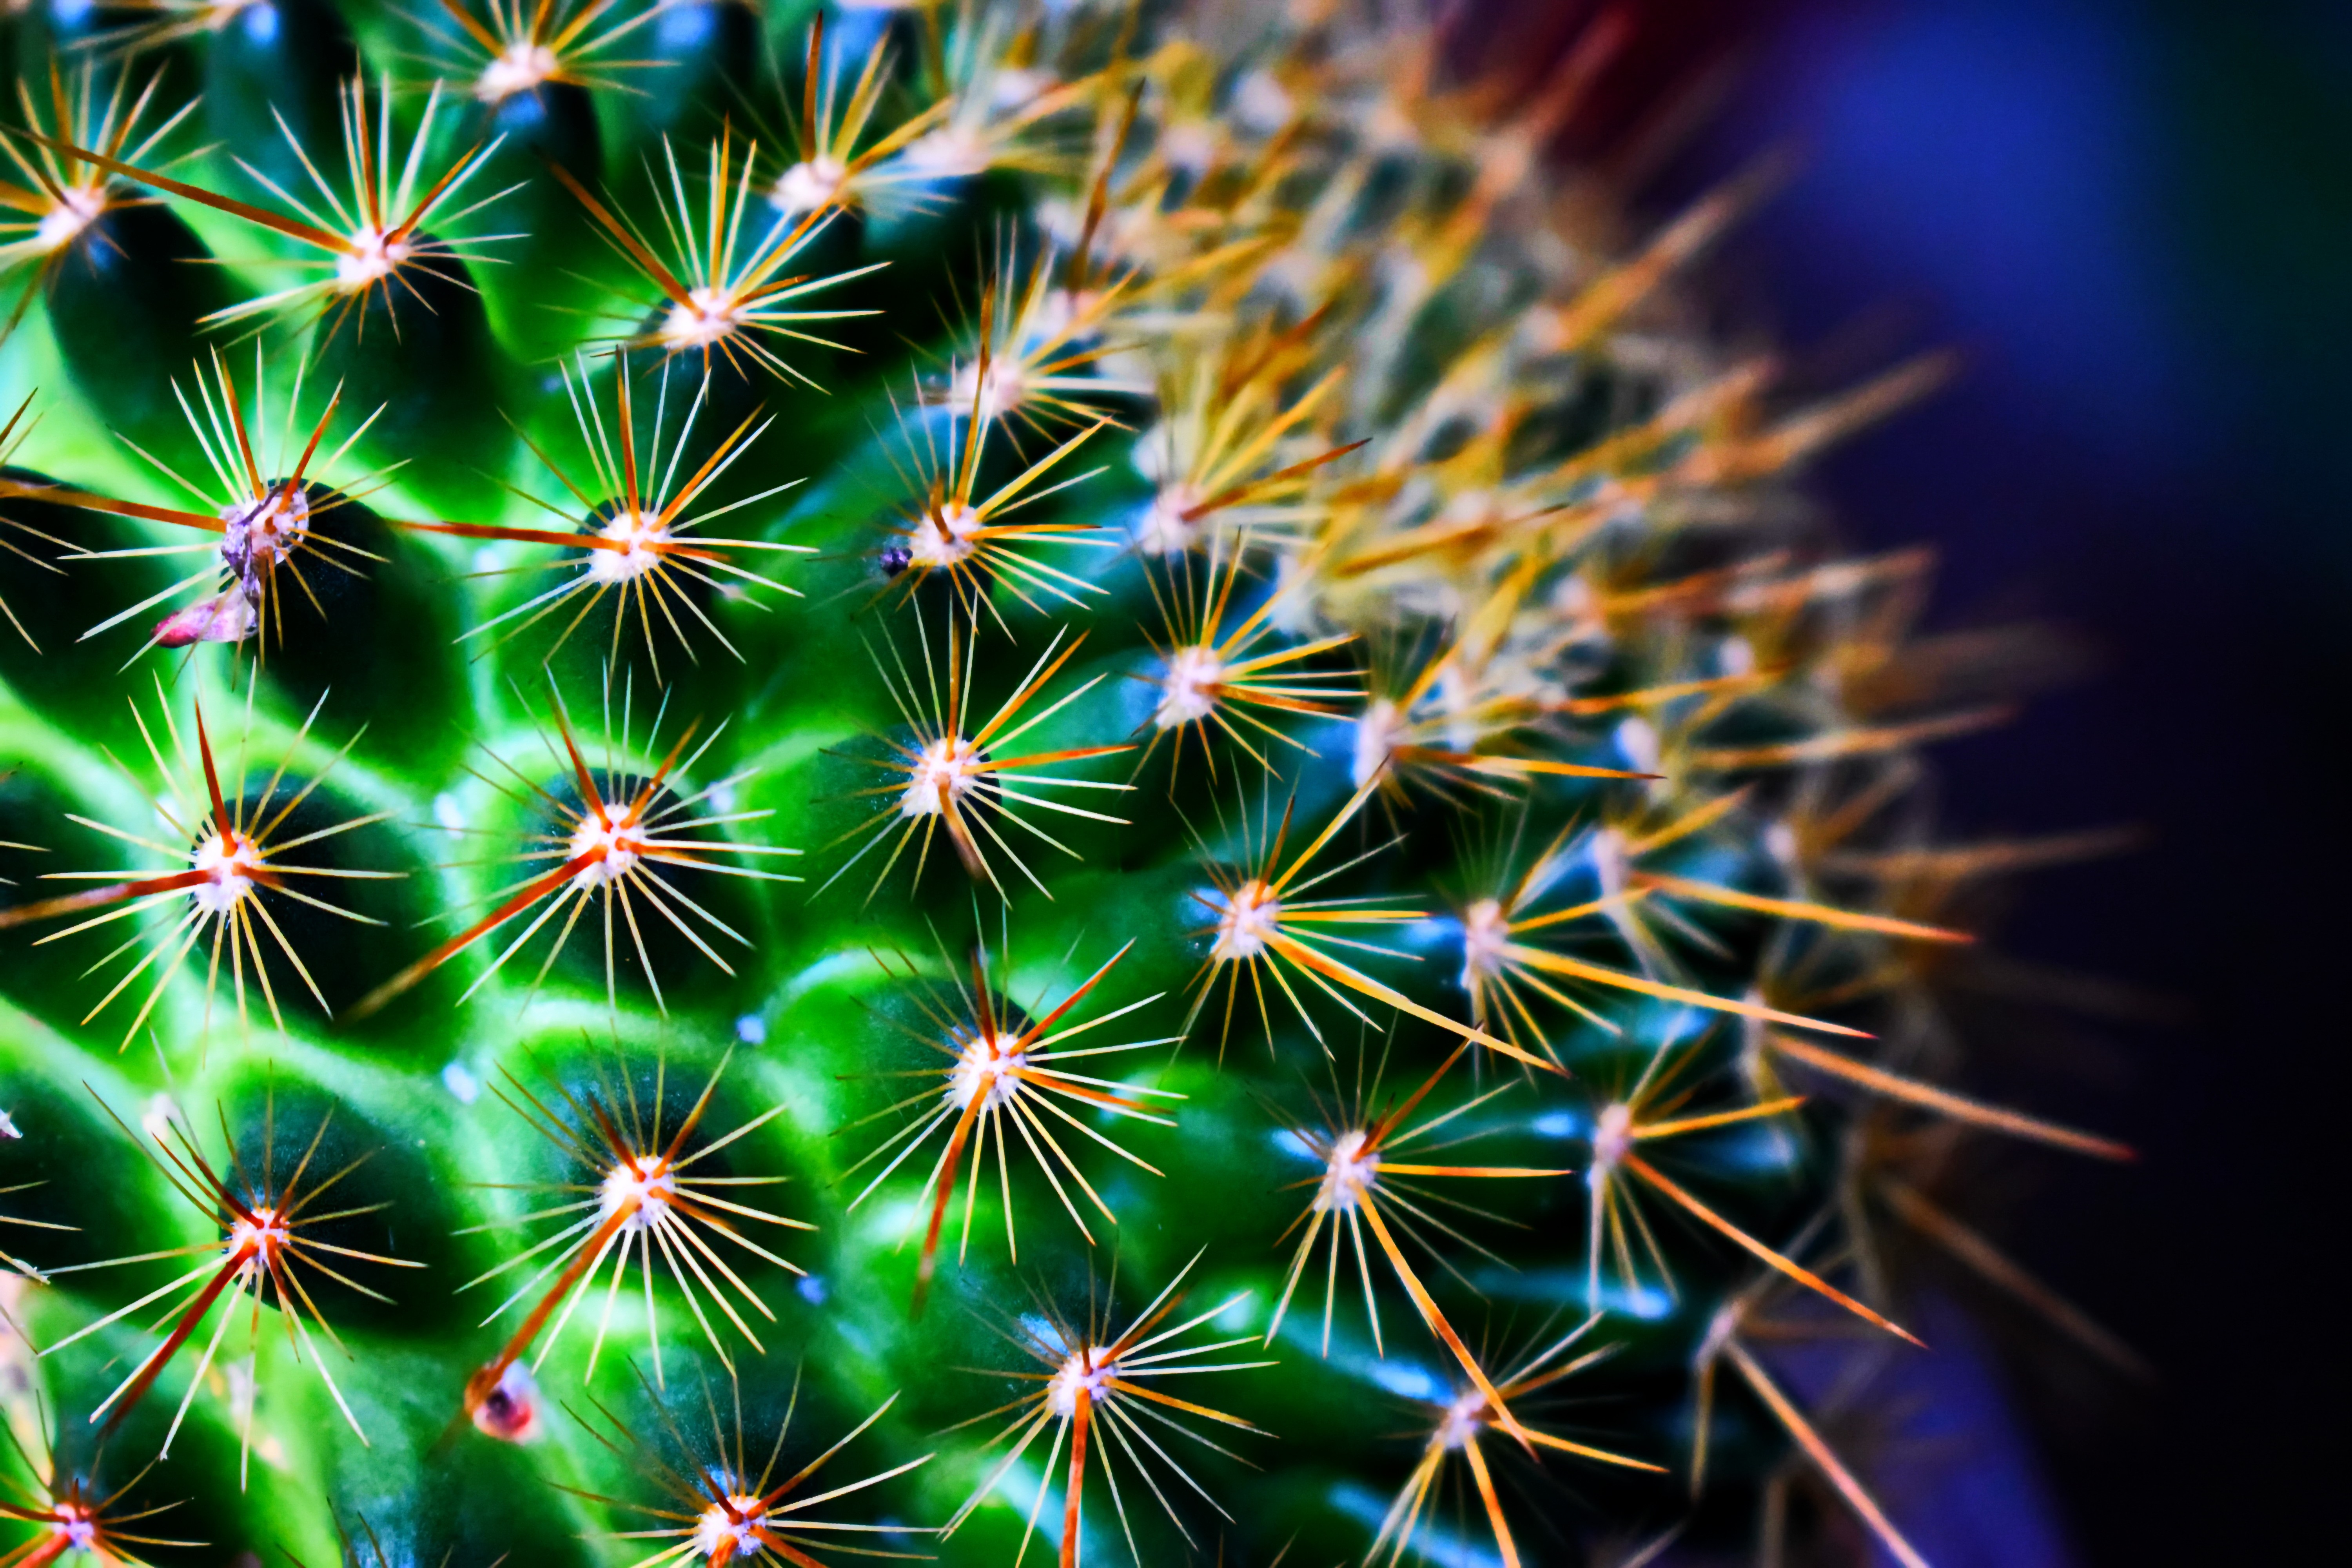 cactus wallpaper hd,cactus,green,thorns, spines, and prickles